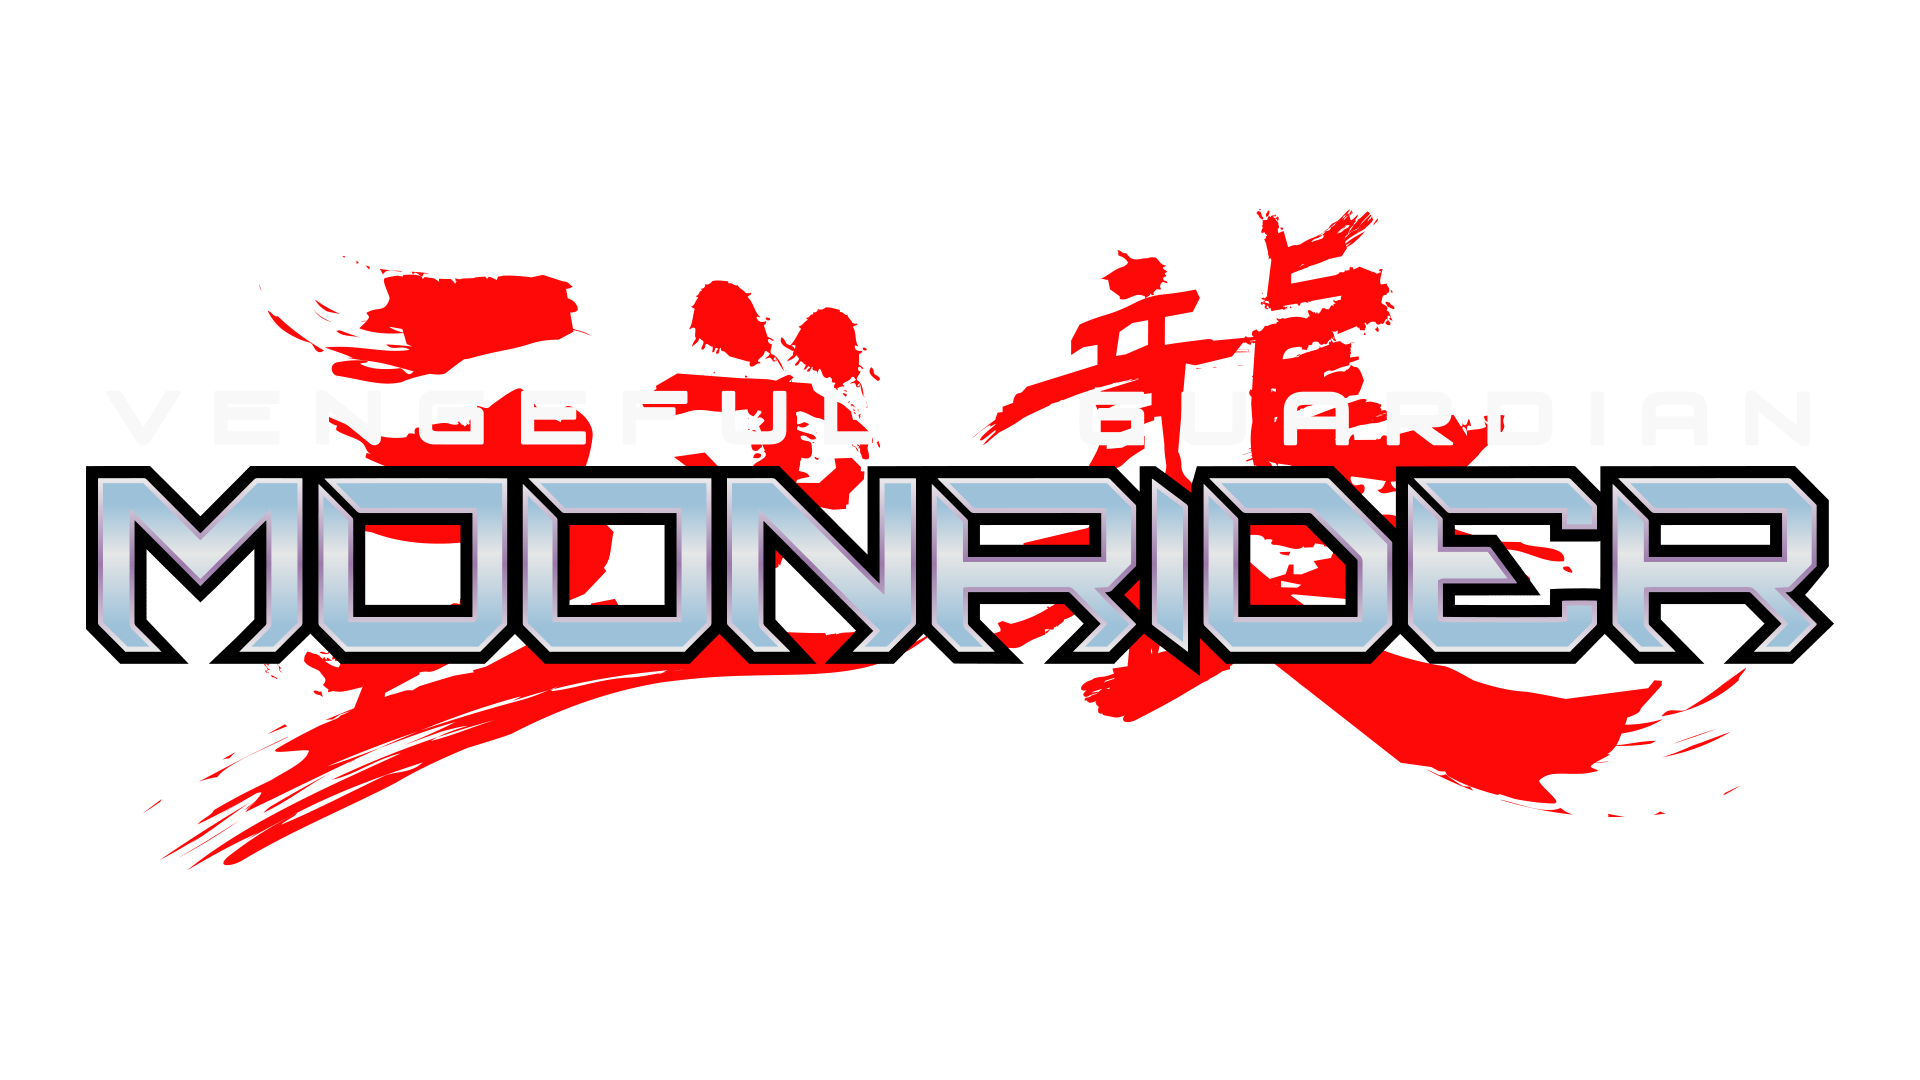 The Arcade Crew - Cross Blitz is out in EA! 🏴‍☠️ on X: Your quest for  revenge is on. Vengeful Guardian: Moonrider, from @JoyMasher the creators  of Blazing Chrome, is available now